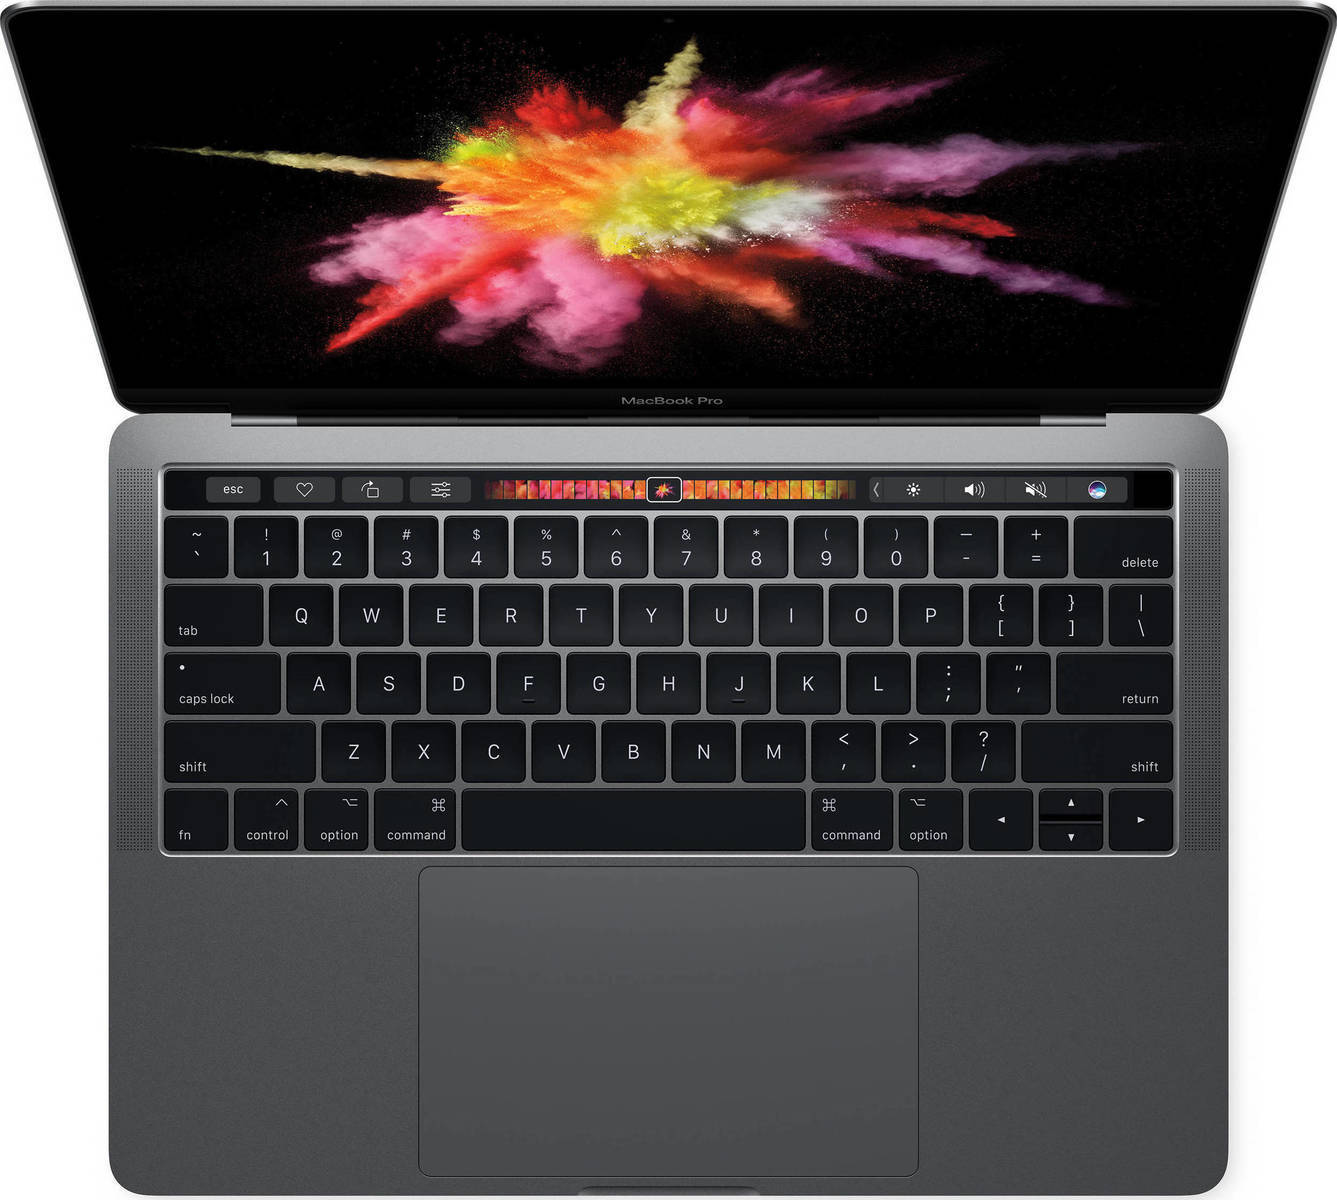 Apple MacBook Pro 13.3" (i5/8GB/512GB) with Touch Bar (2017) Space Gray